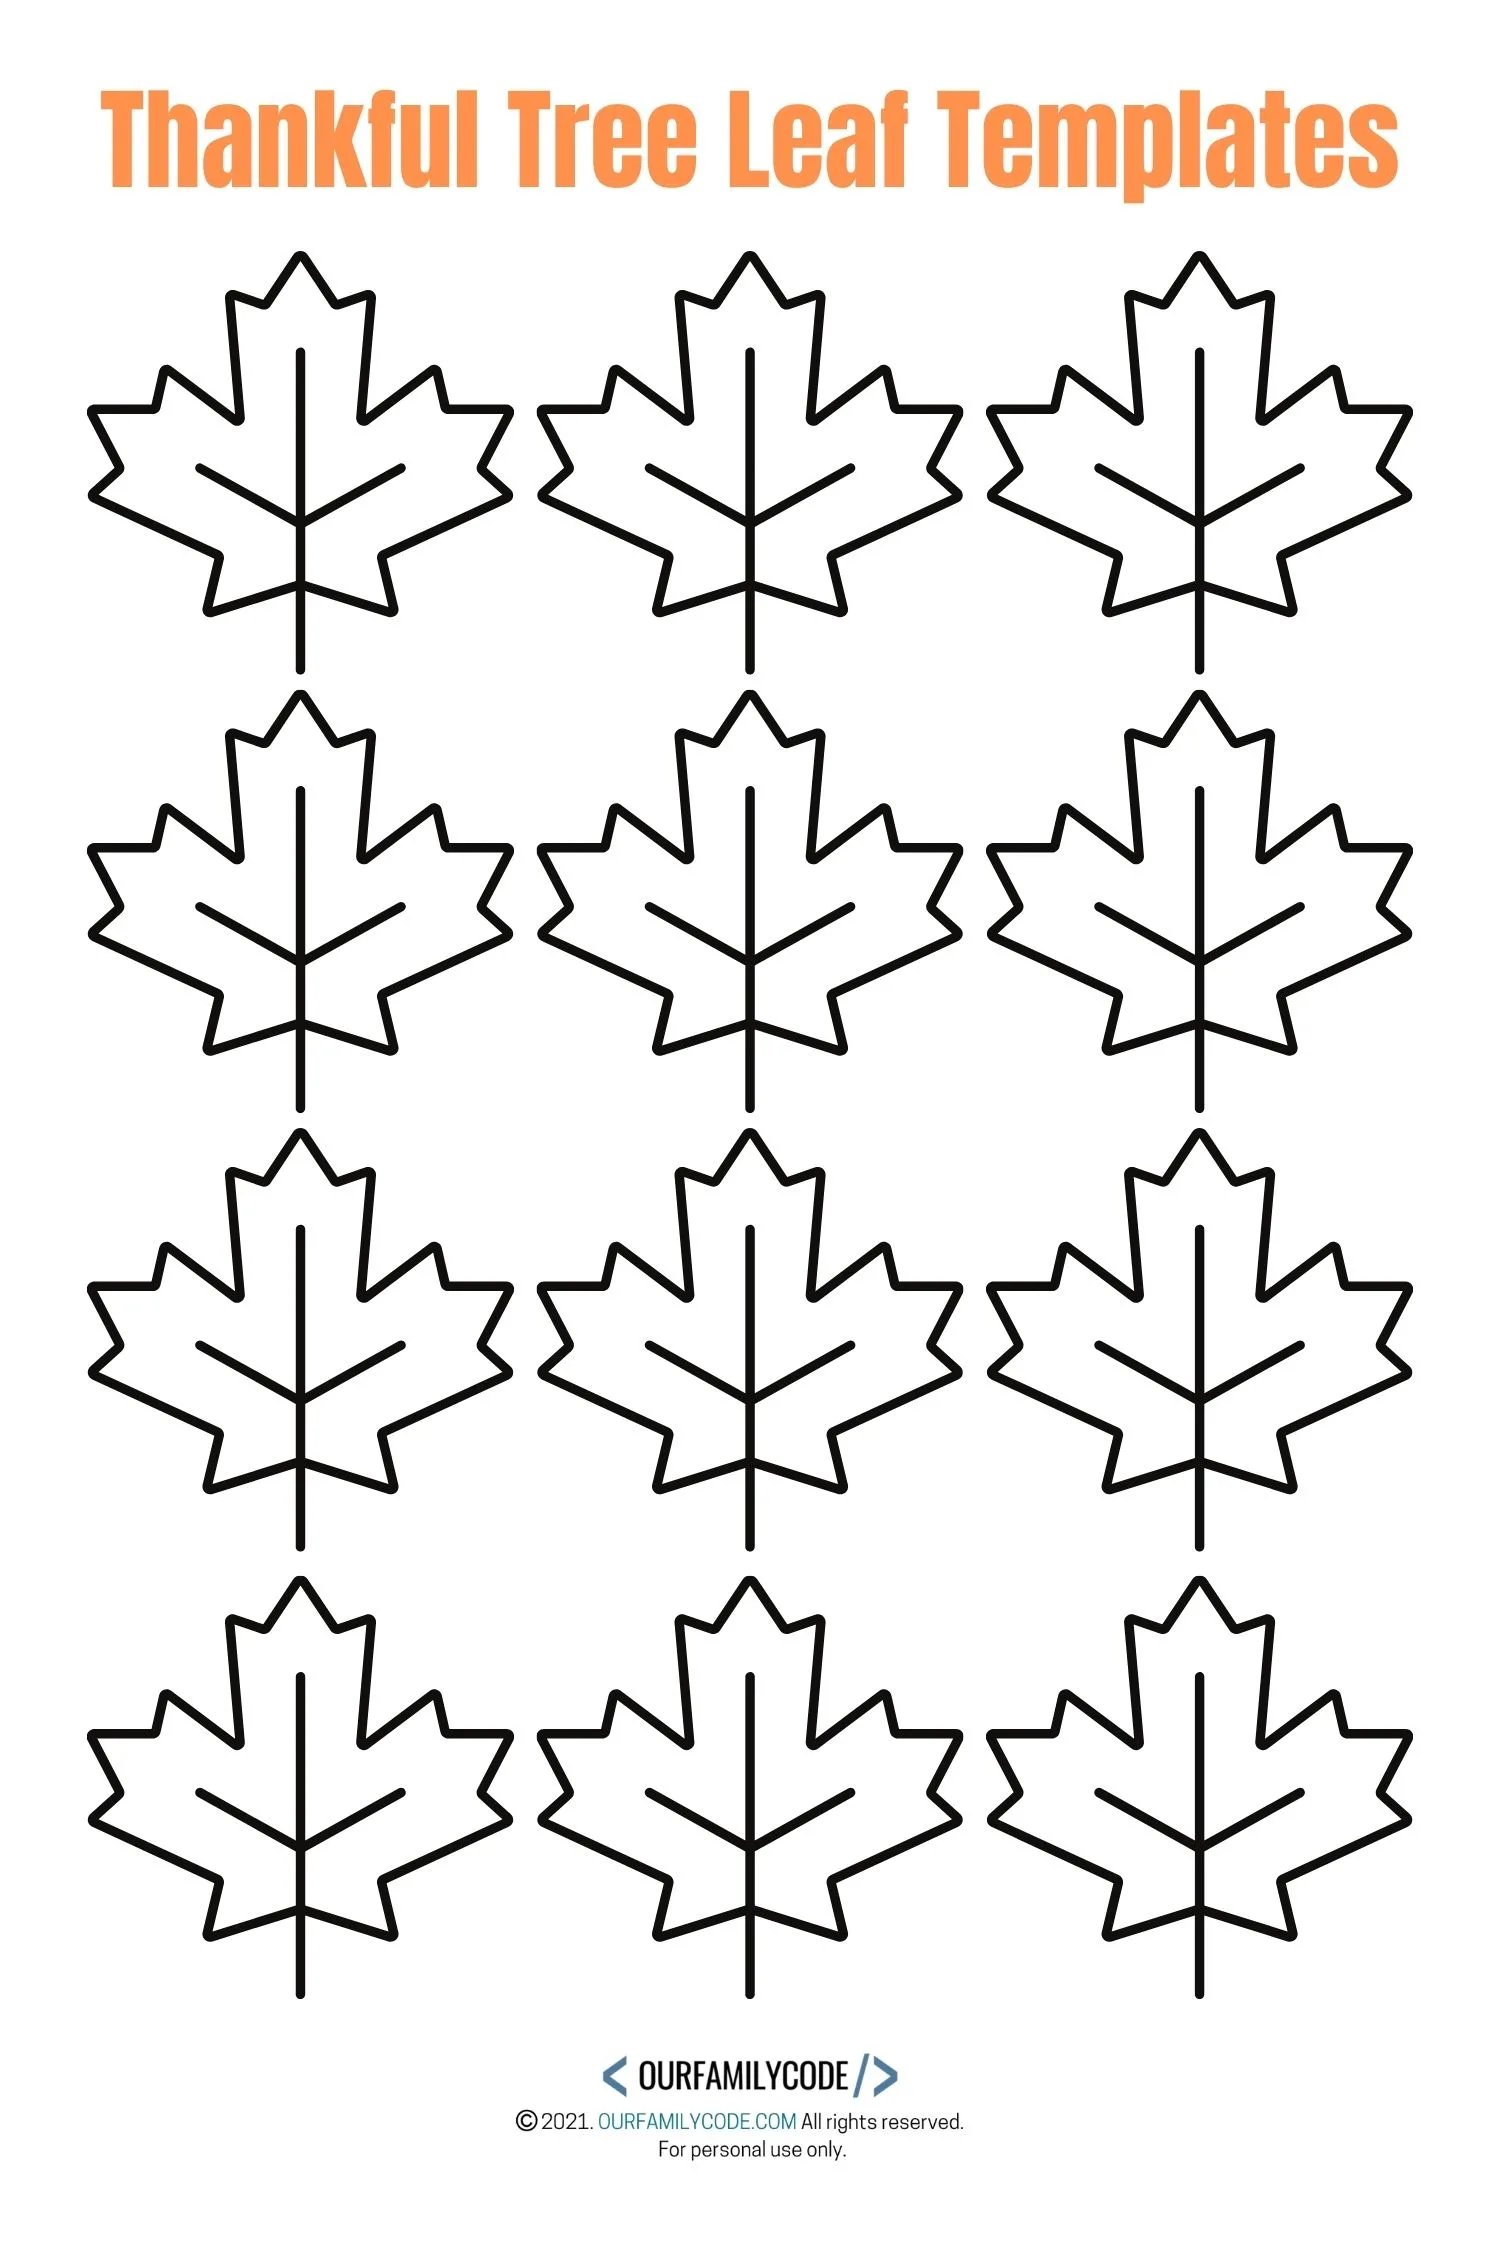 A picture of a Thankful Tree leaf template.